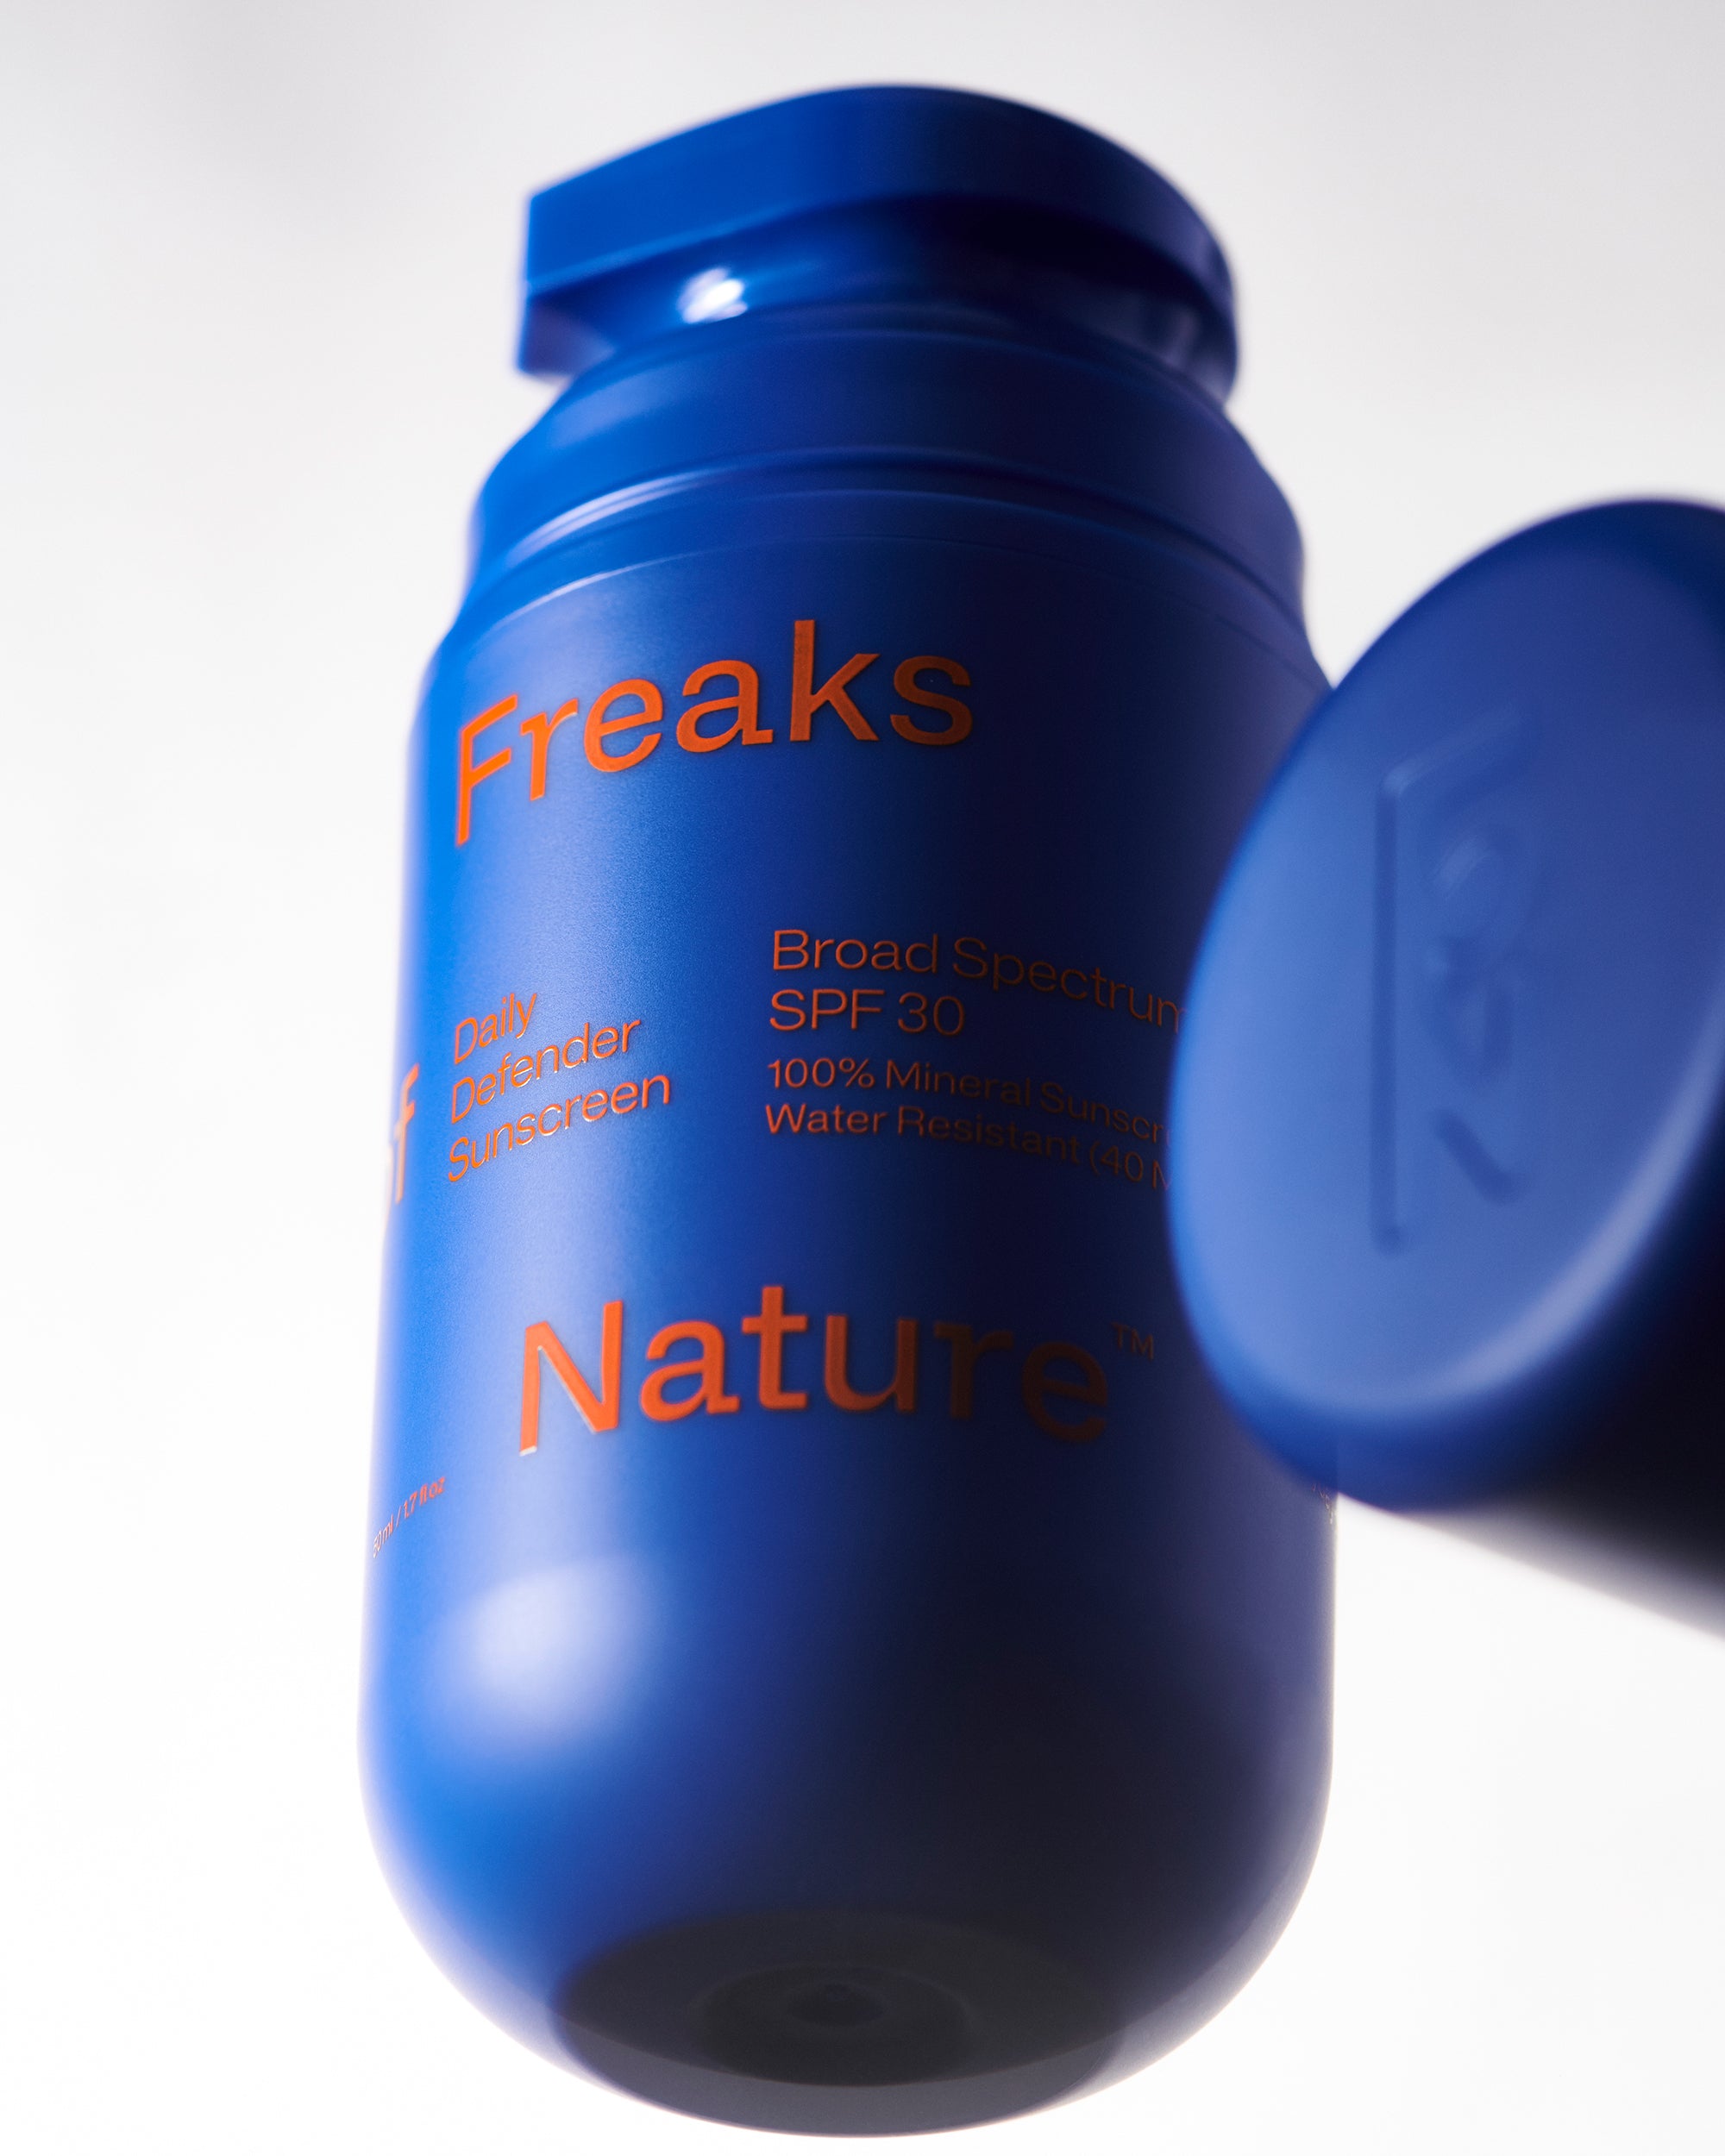 A close-up of a blue cylindrical SPF30 sunscreen bottle featuring "Freaks of Nature Skincare," "Daily System Sunscreen," "Broad Spectrum SPF 30," "100% Mineral Sunscreen," and "Water Resistant (40 min)." Infused with vegan Squalane, the bottle boasts a matching blue cap.